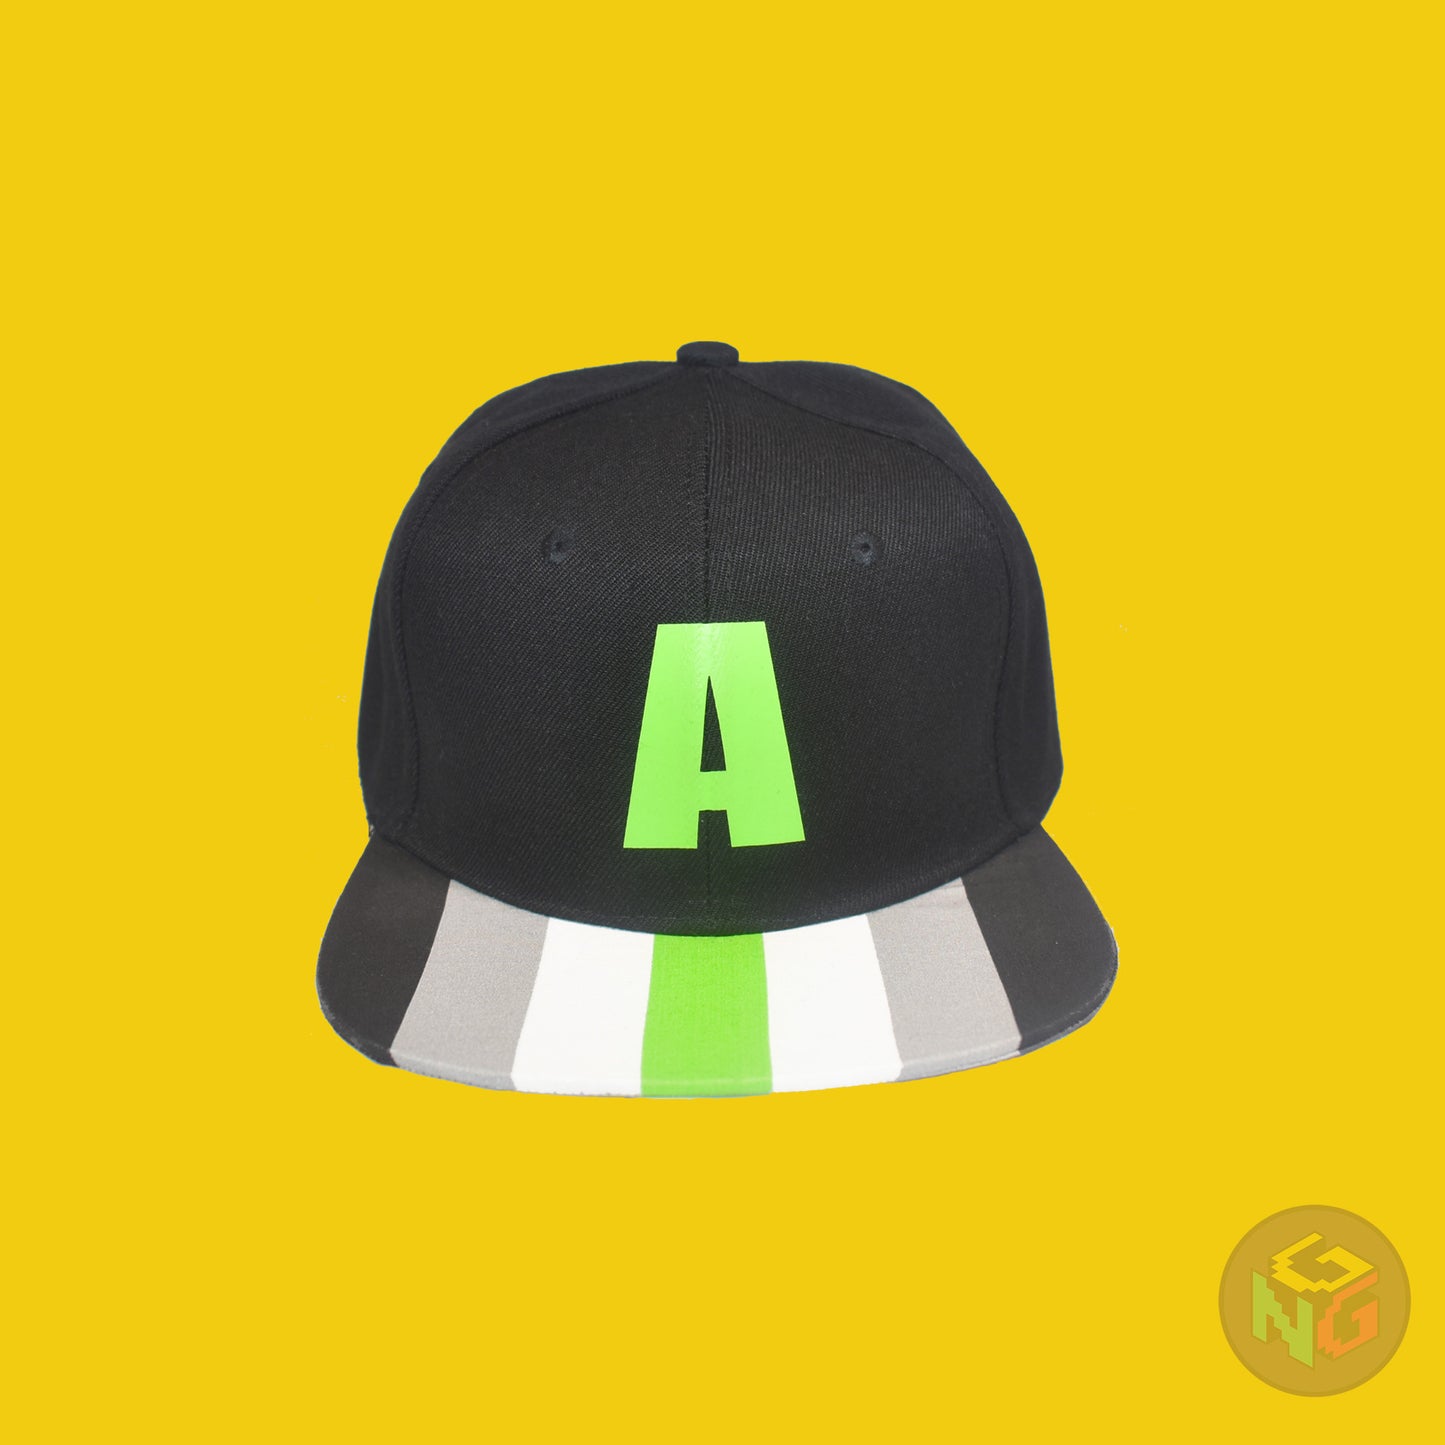 Black flat bill snapback hat. The brim has the agender pride flag on both sides and the front of the hat has a green letter “A”. Front view